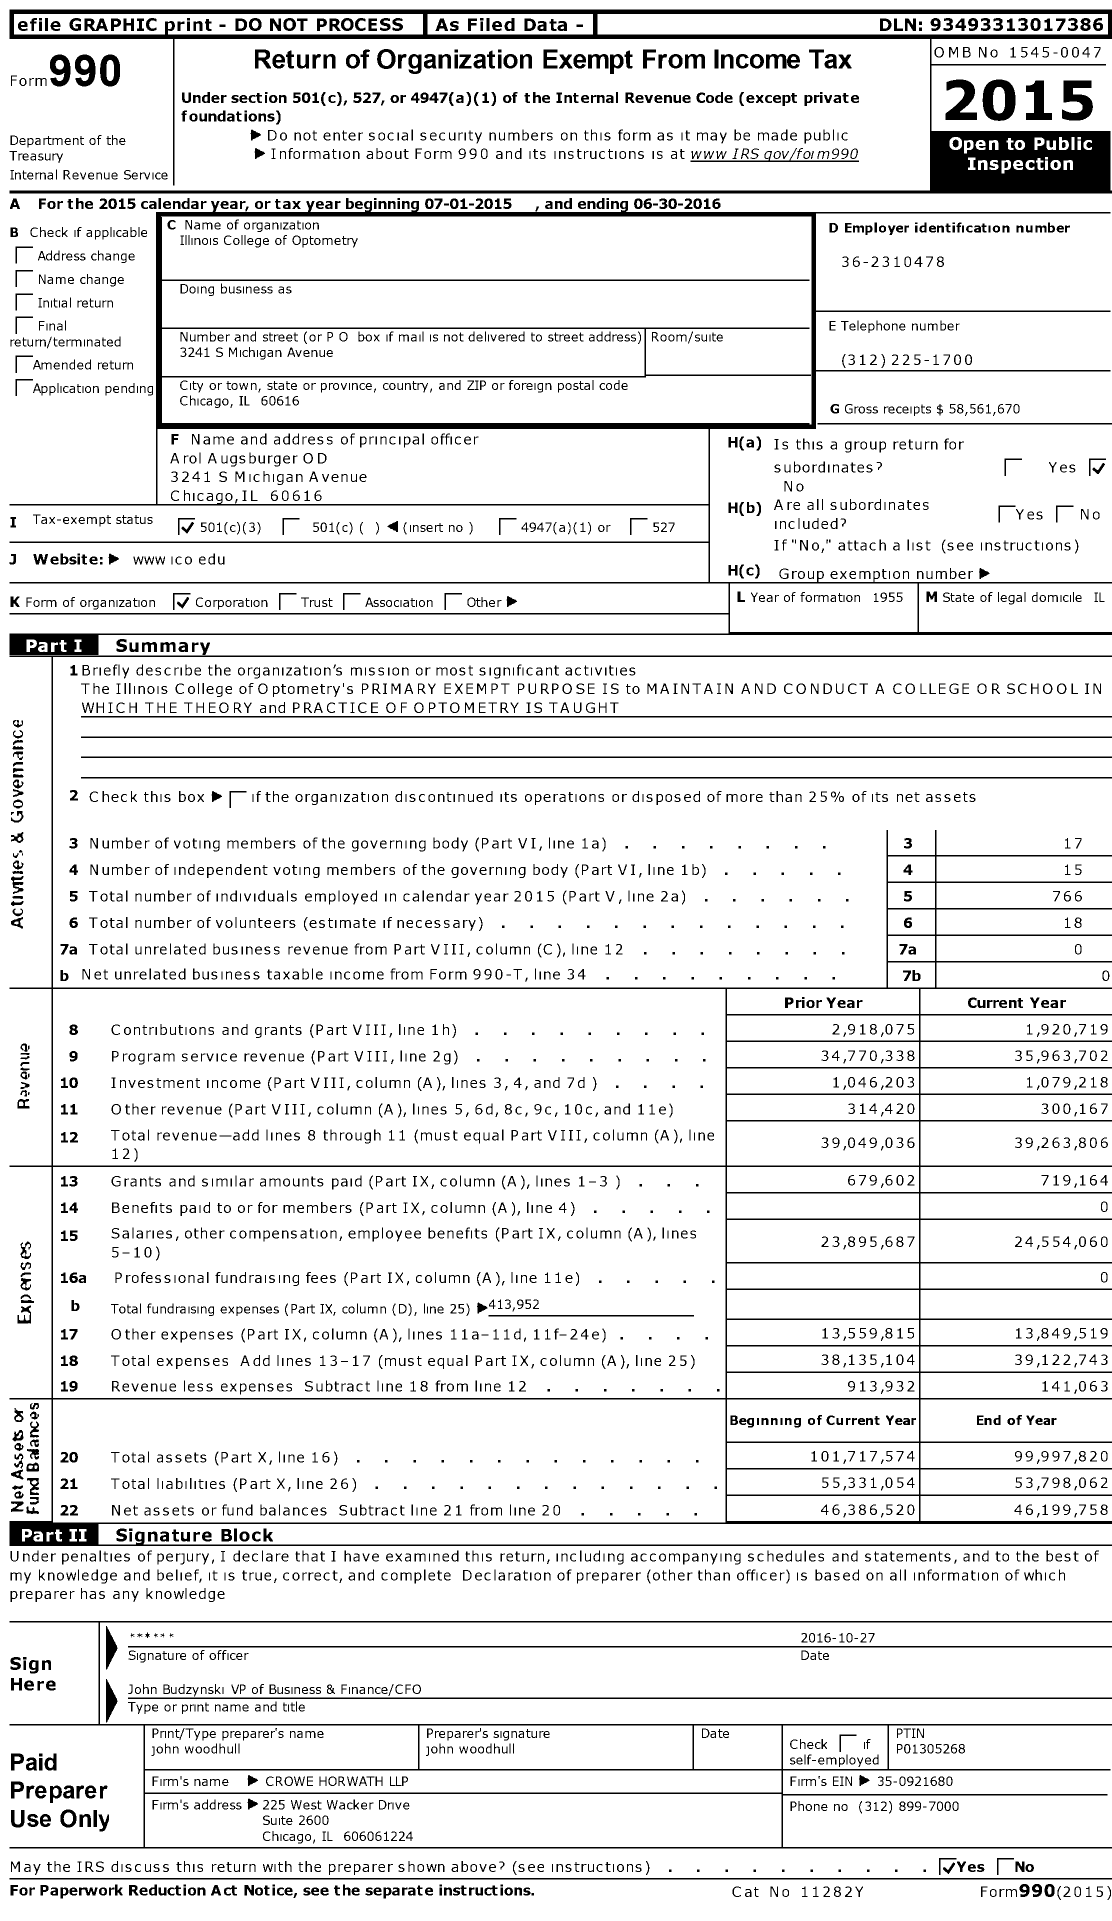 Image of first page of 2015 Form 990 for Illinois College of Optometry (ICO)